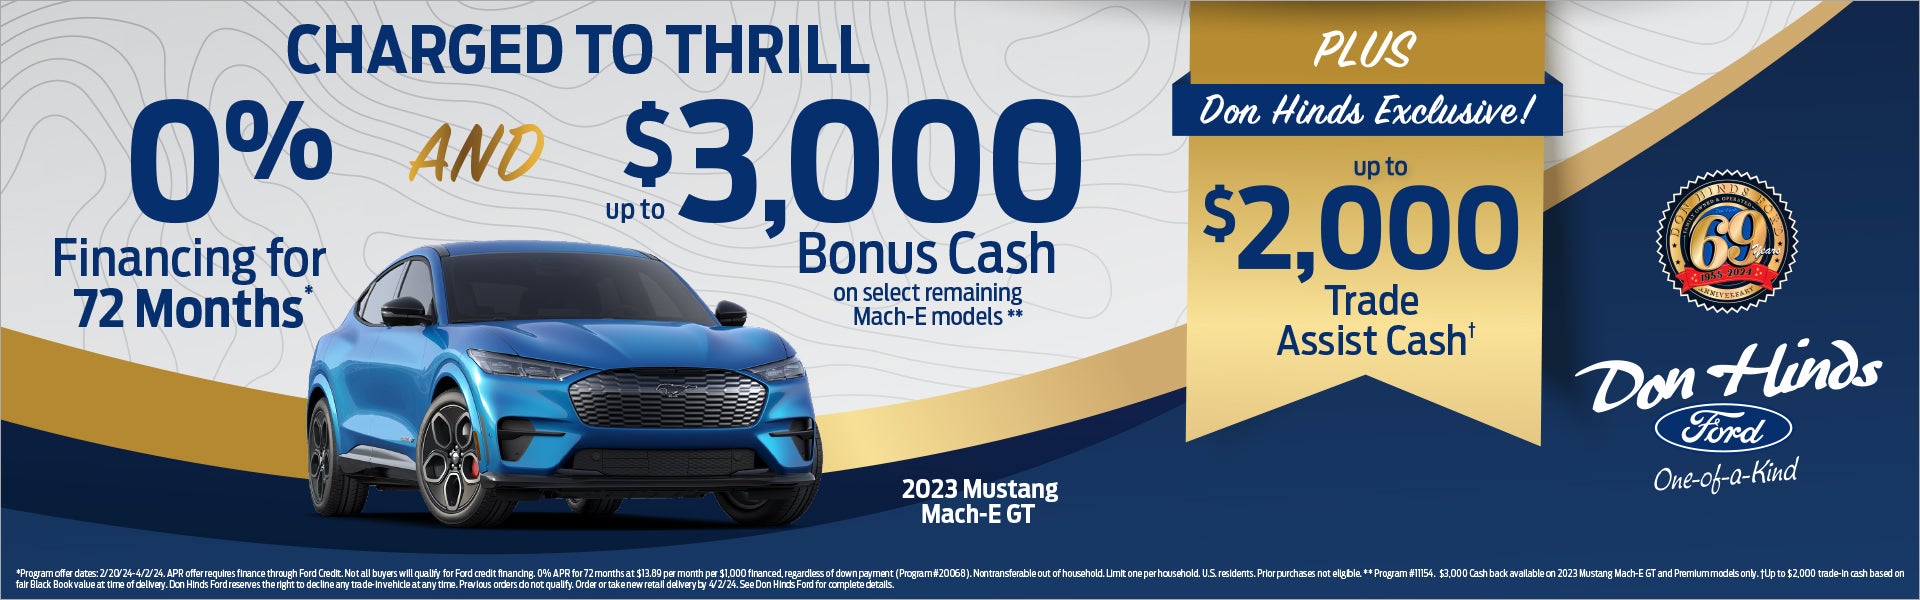 Don Hinds Ford Blue & gold offer Mustang Mac-hE